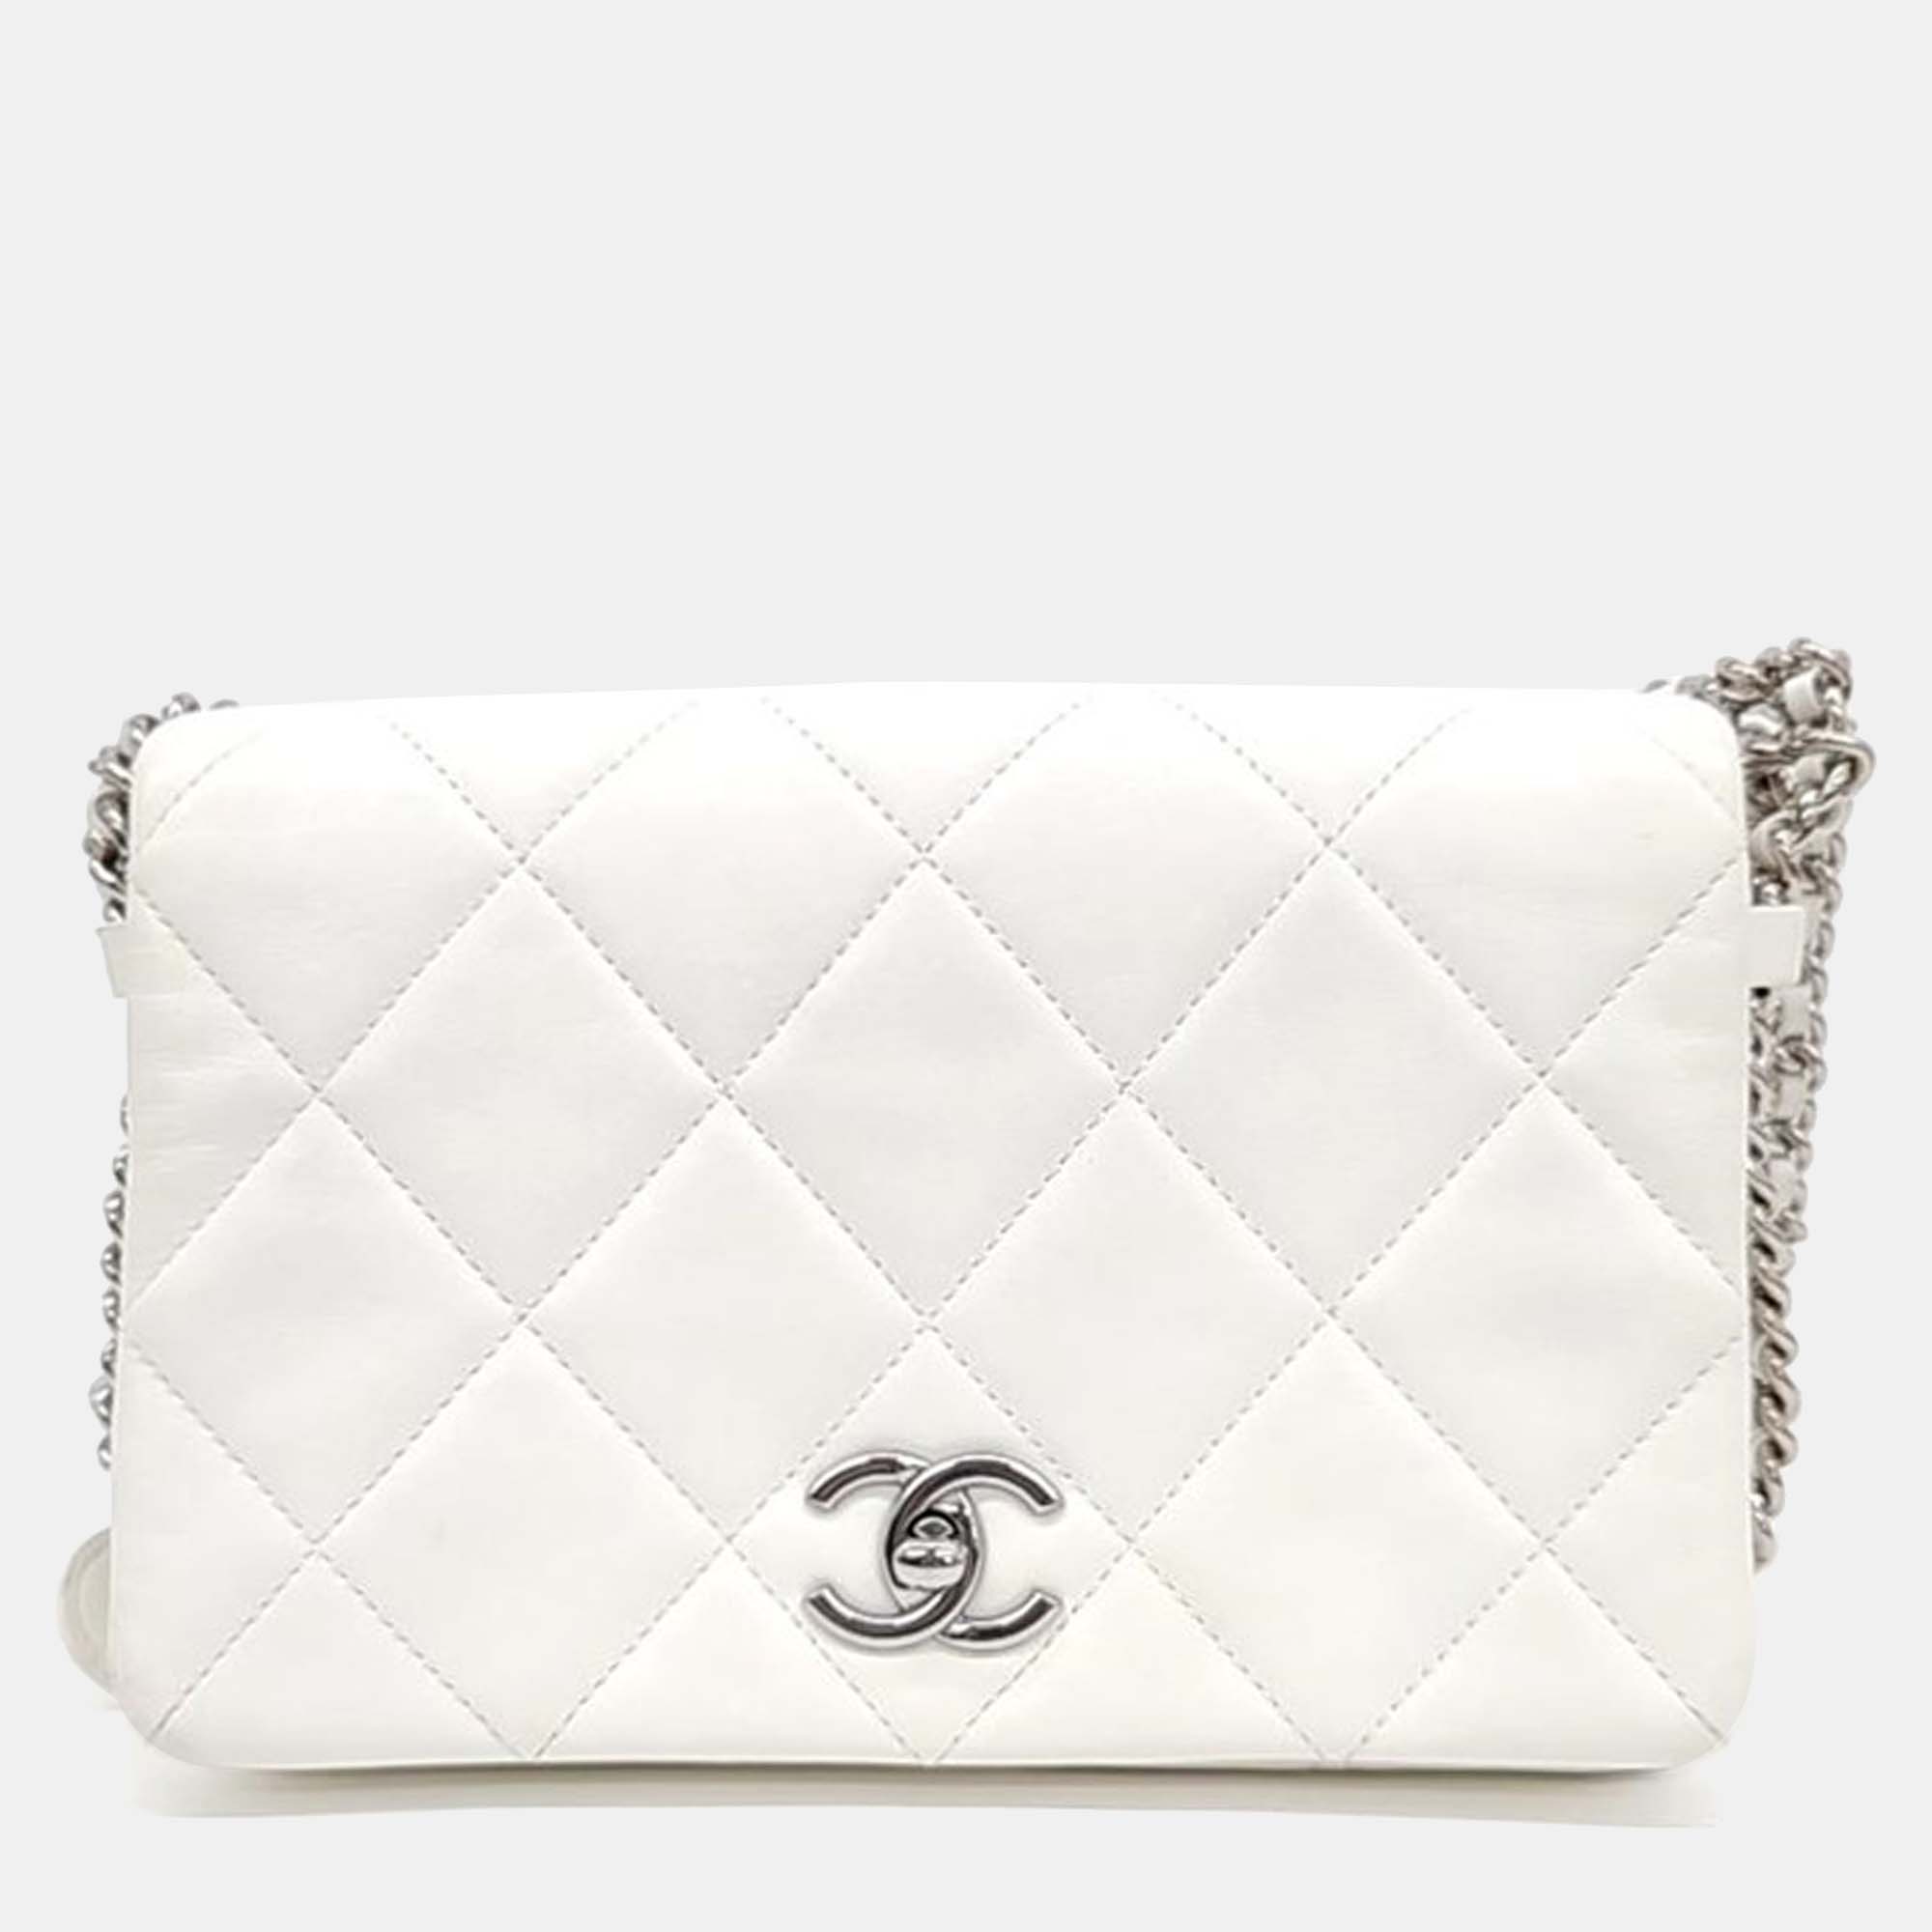 Crafted with precision this Chanel shoulder bag combines luxurious materials with impeccable design ensuring you make a sophisticated statement wherever you go. Invest in it today.